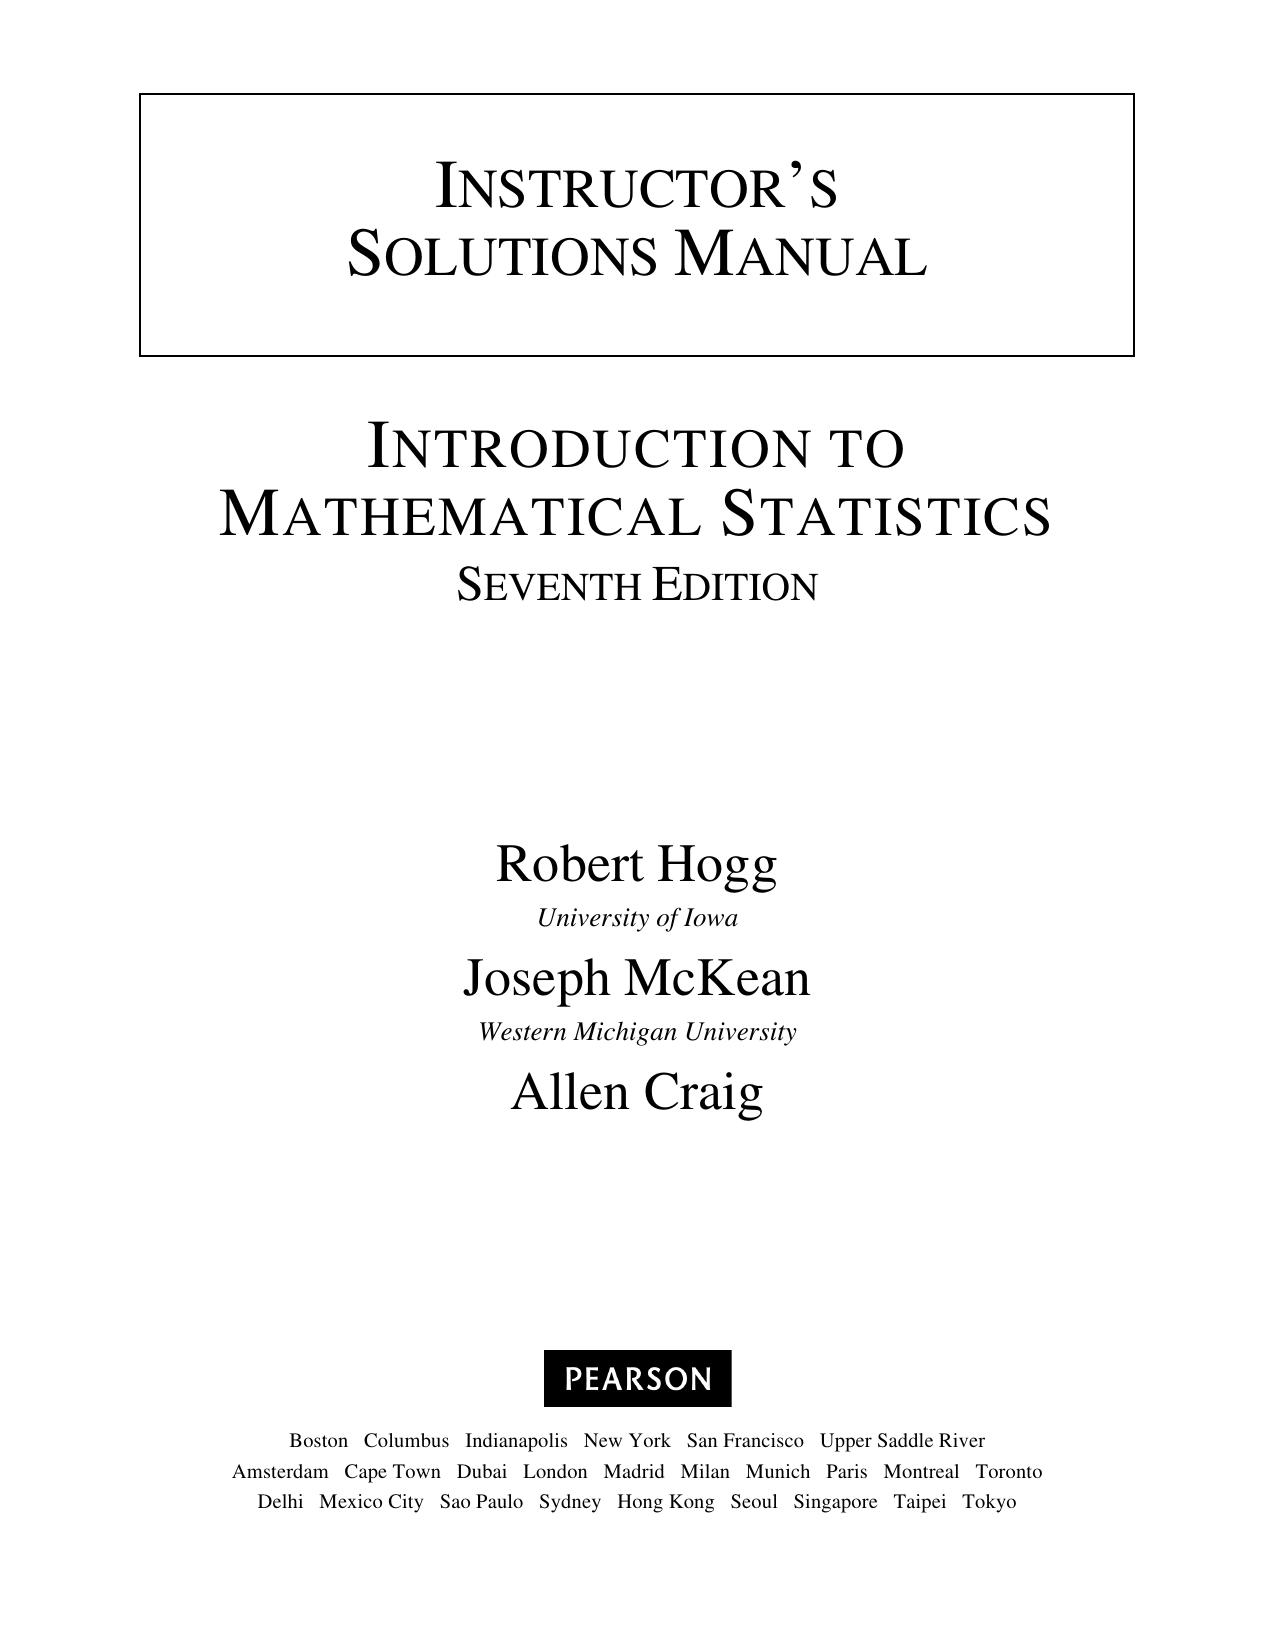 Introduction to Mathematical Statistics - Seventh Edition - Instructor’s Solutions Manual